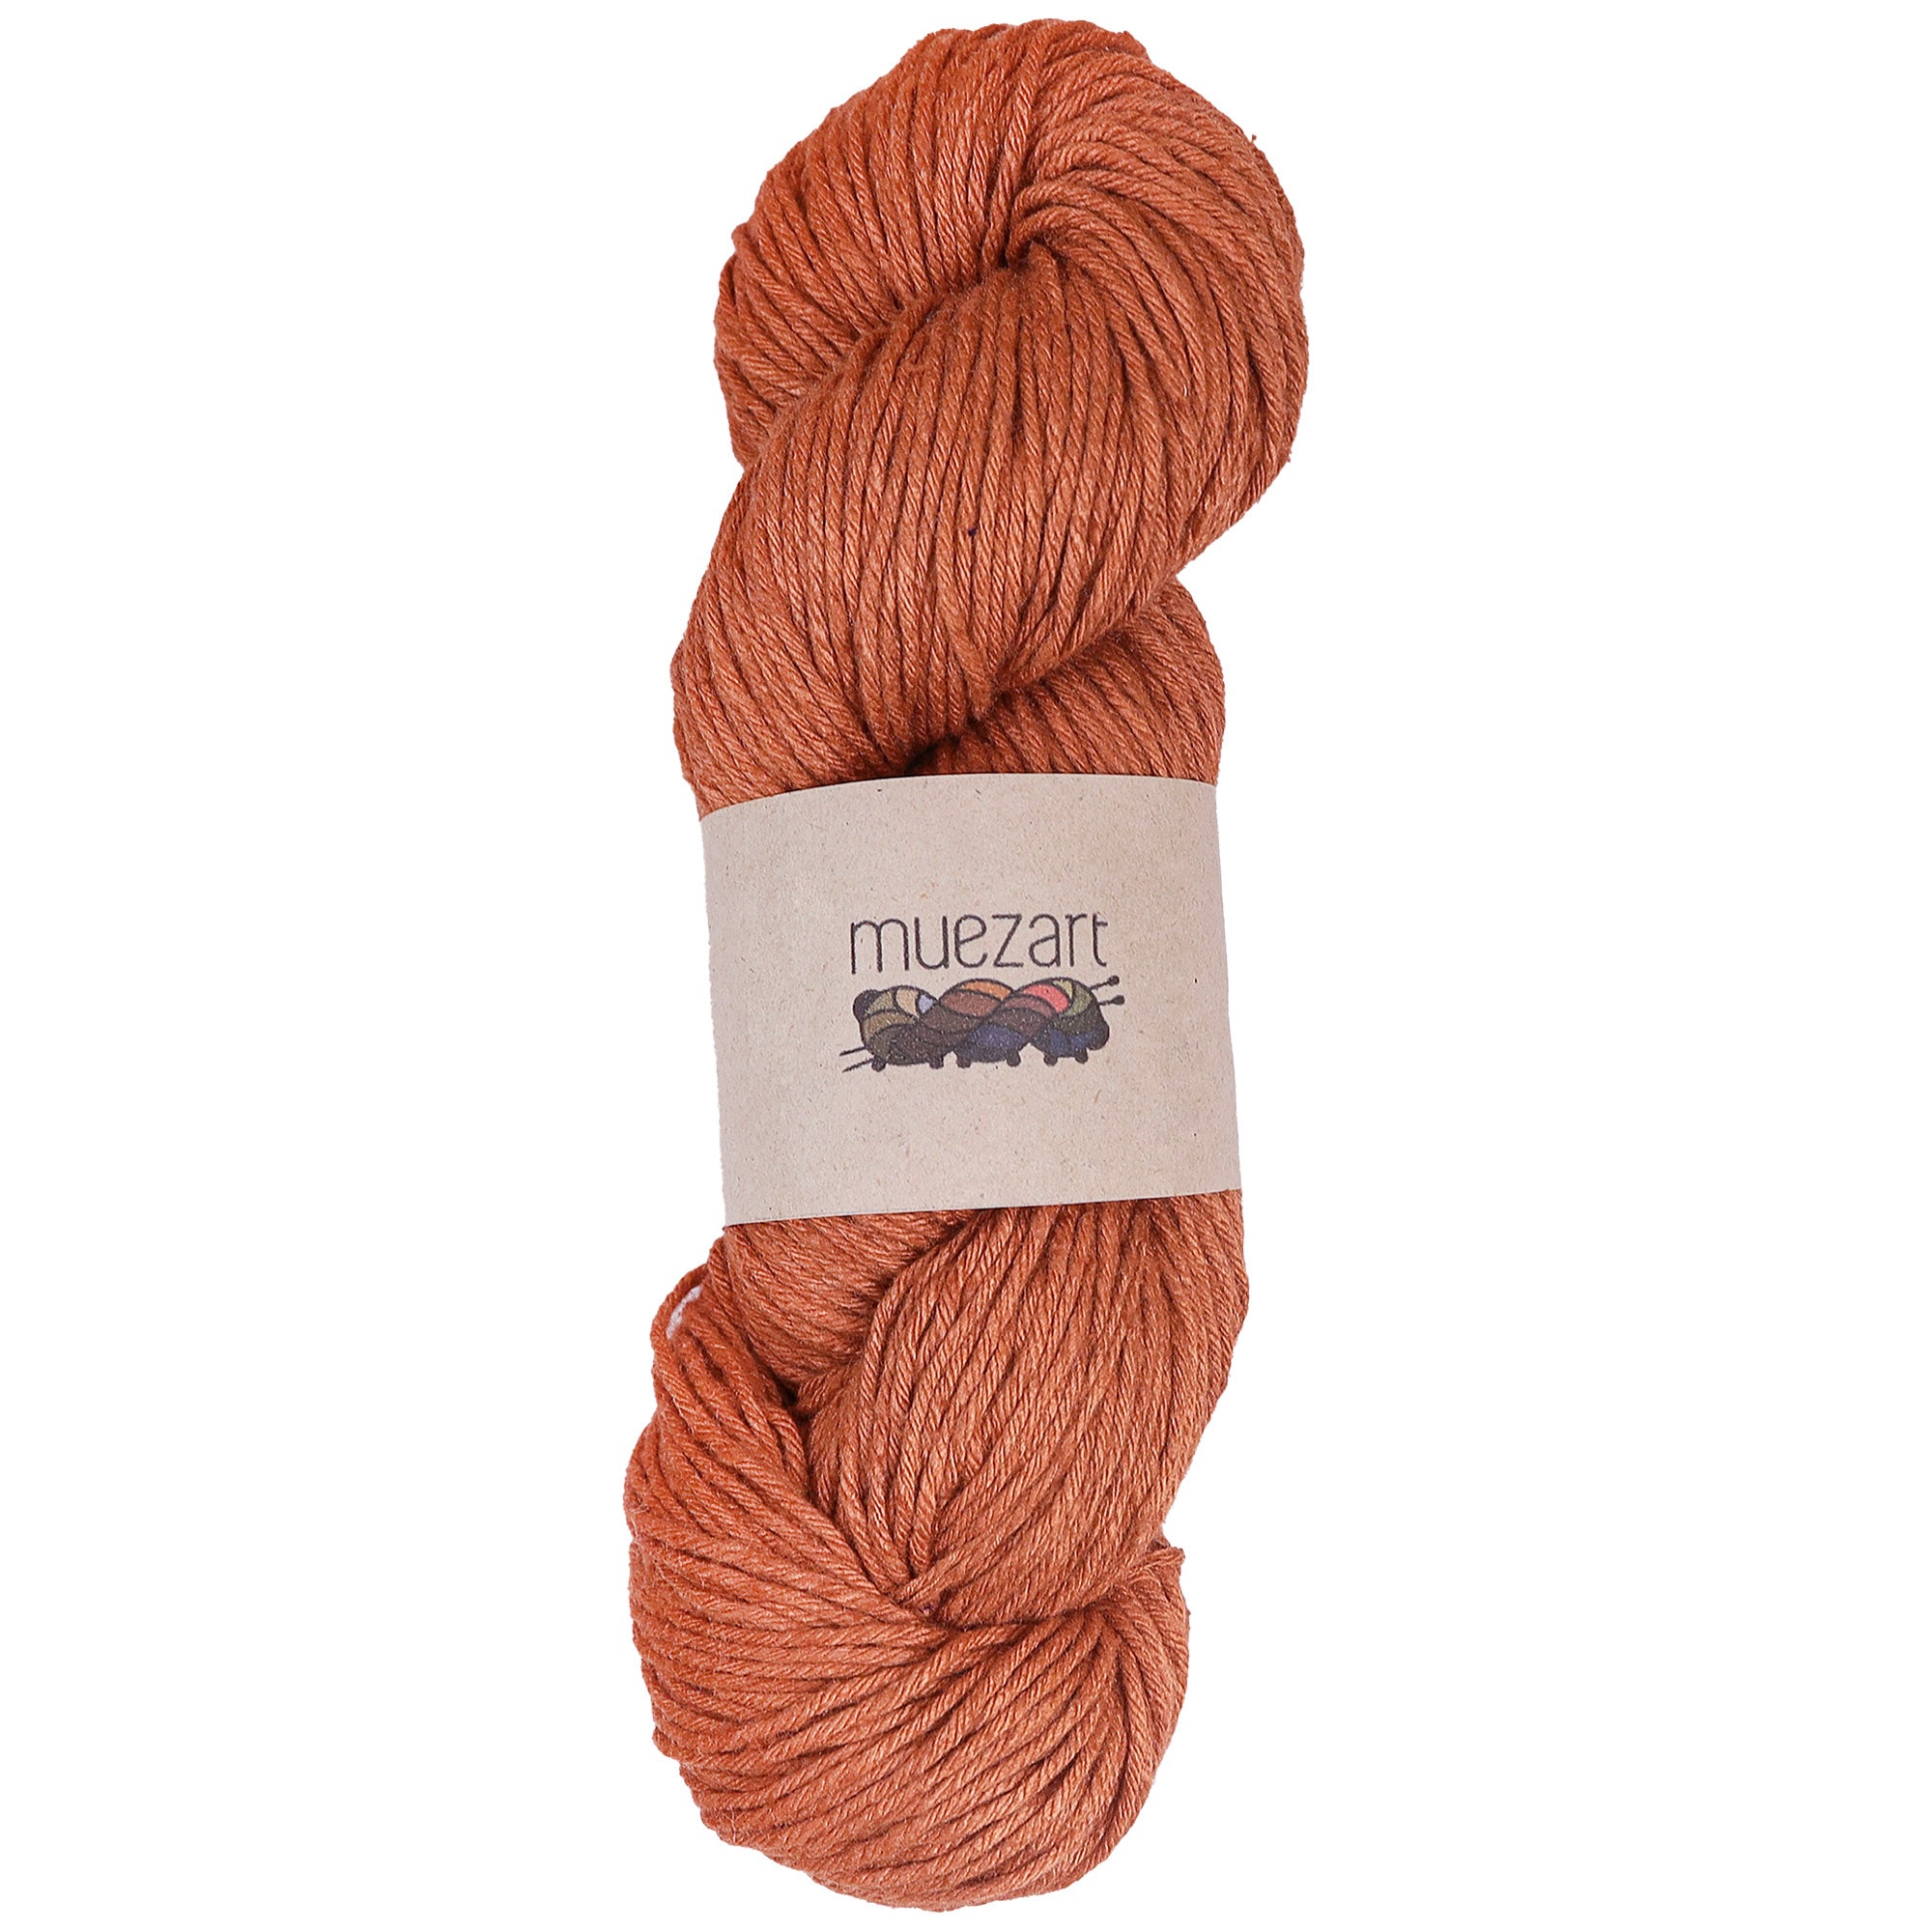 How to Select Yarn For Knitting? How to Select Yarn For Crochet? – Muezart  India